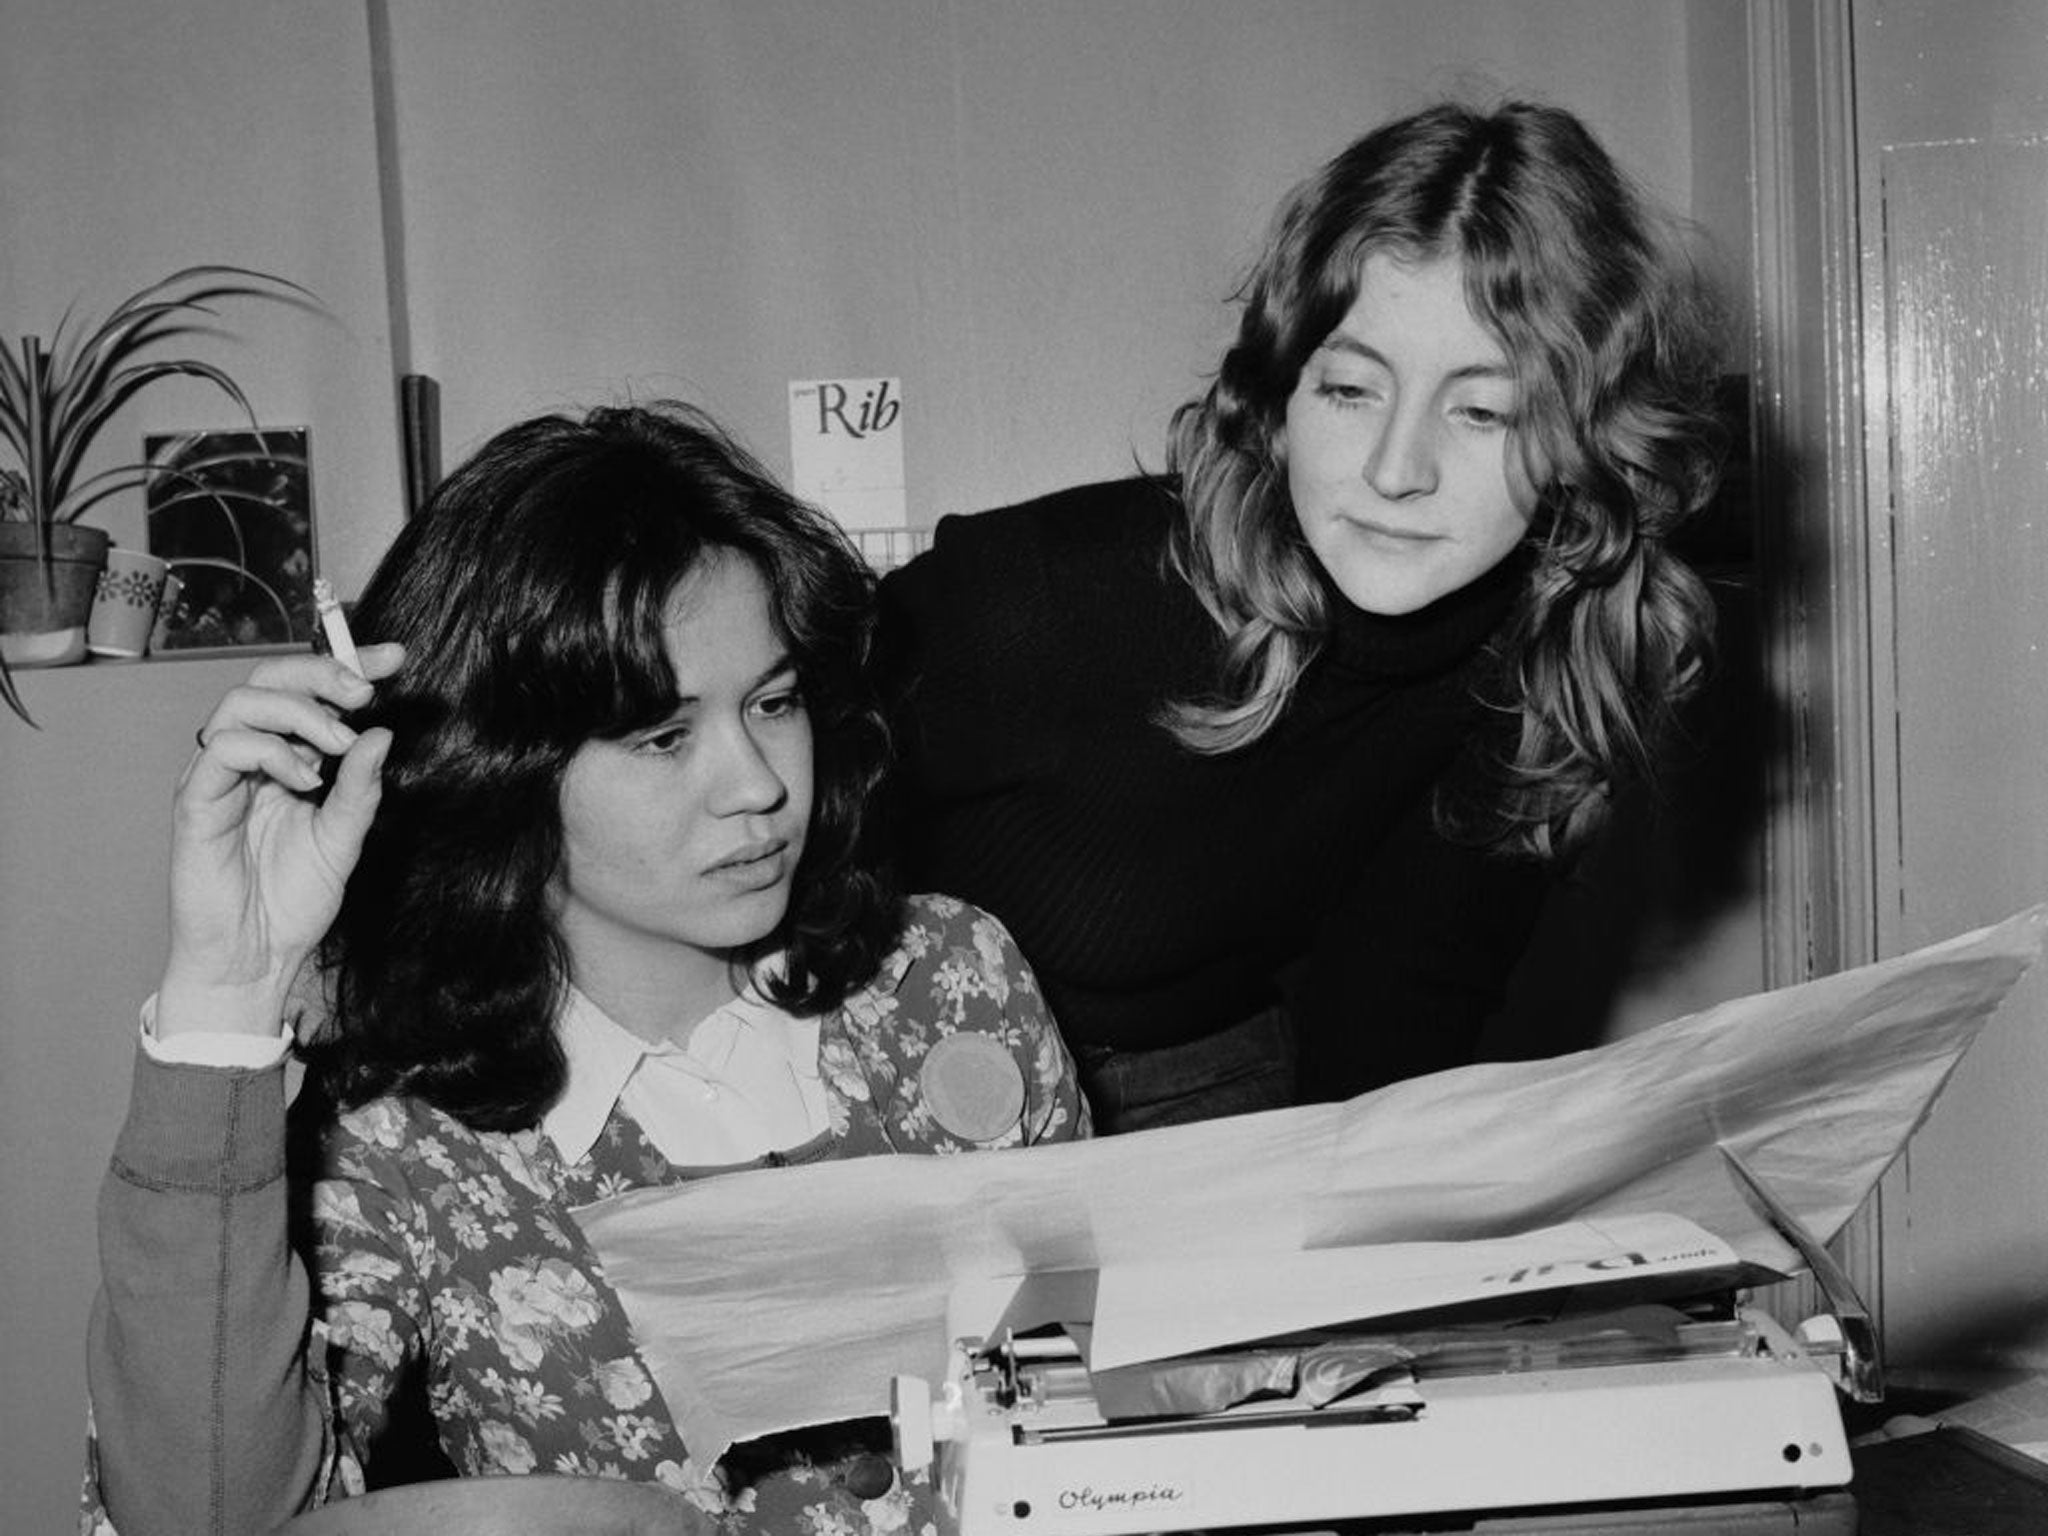 English journalists and publishers Marsha Rowe (left) and Rosie Boycott, founders of the feminist magazine 'Spare Rib', at the magazine's offices, 19th June 1972